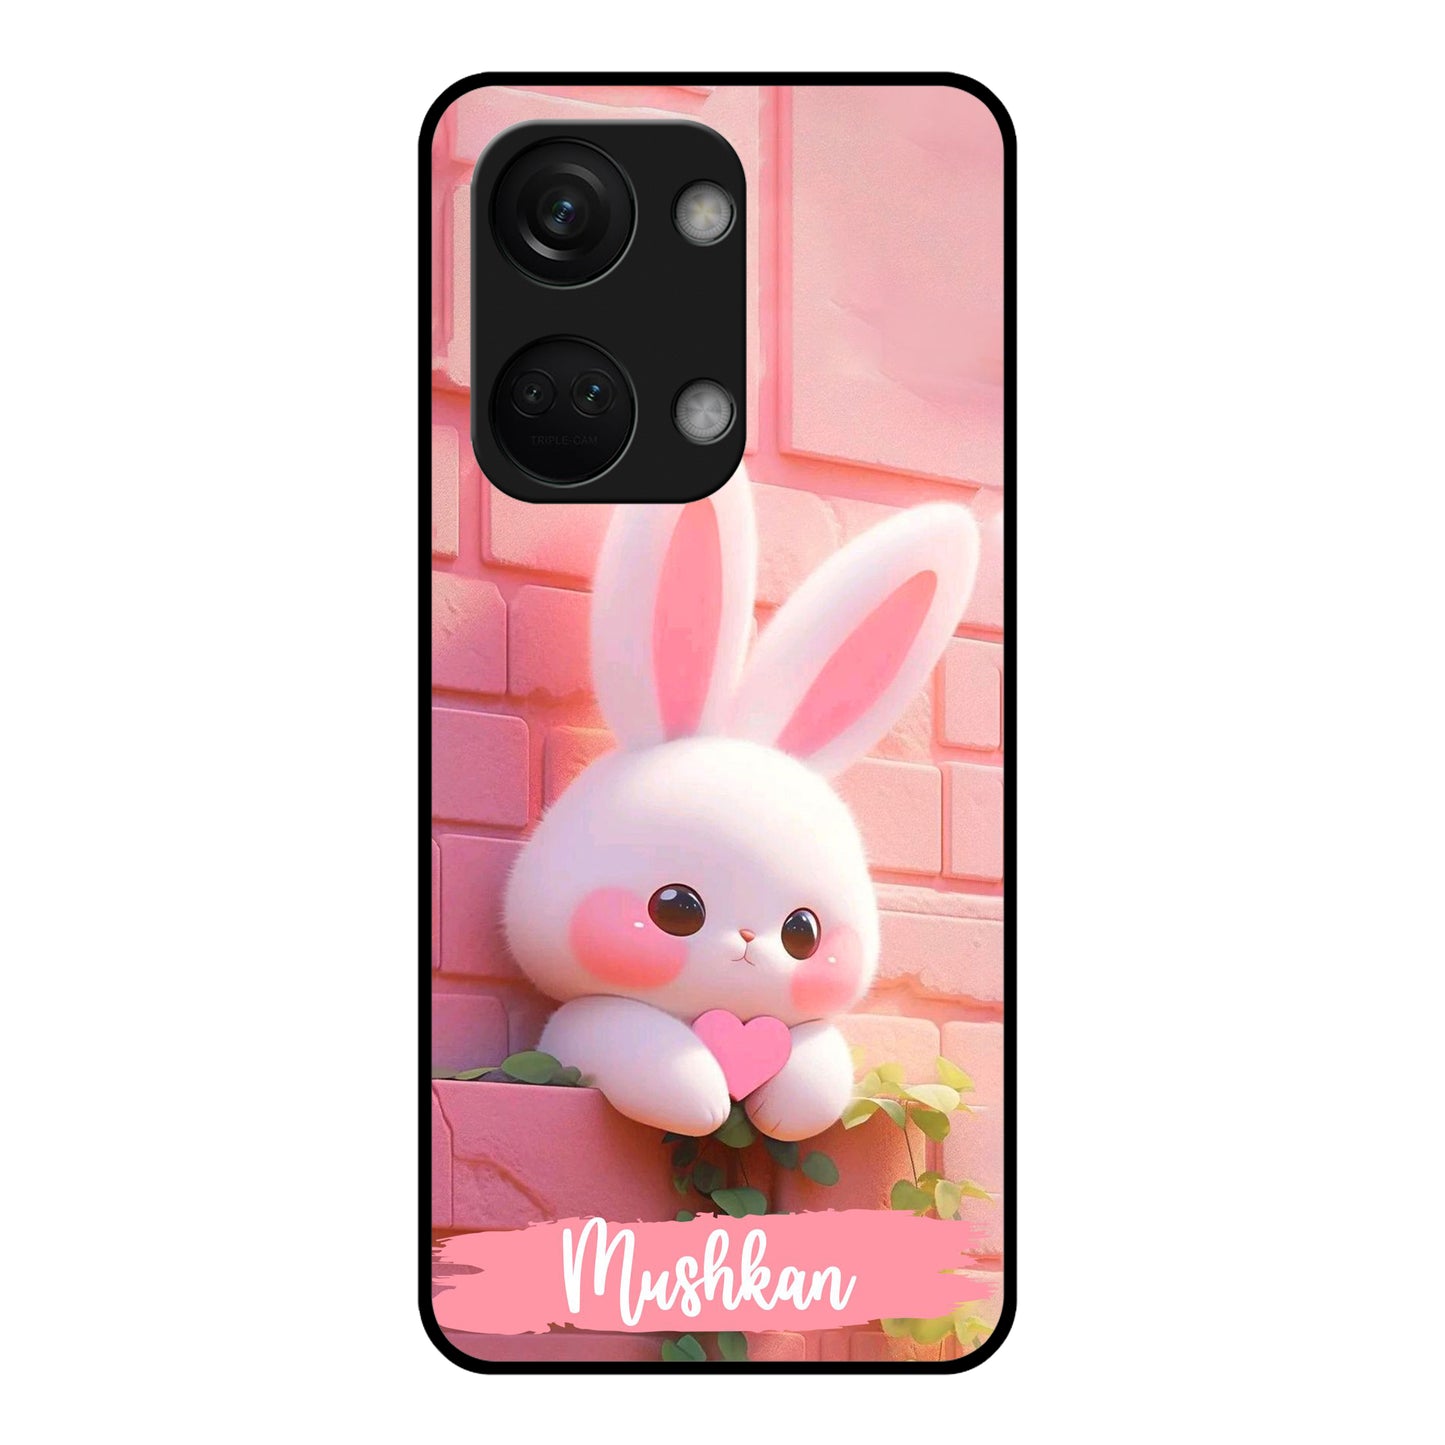 Bunny Glossy Metal Case Cover For OnePlus